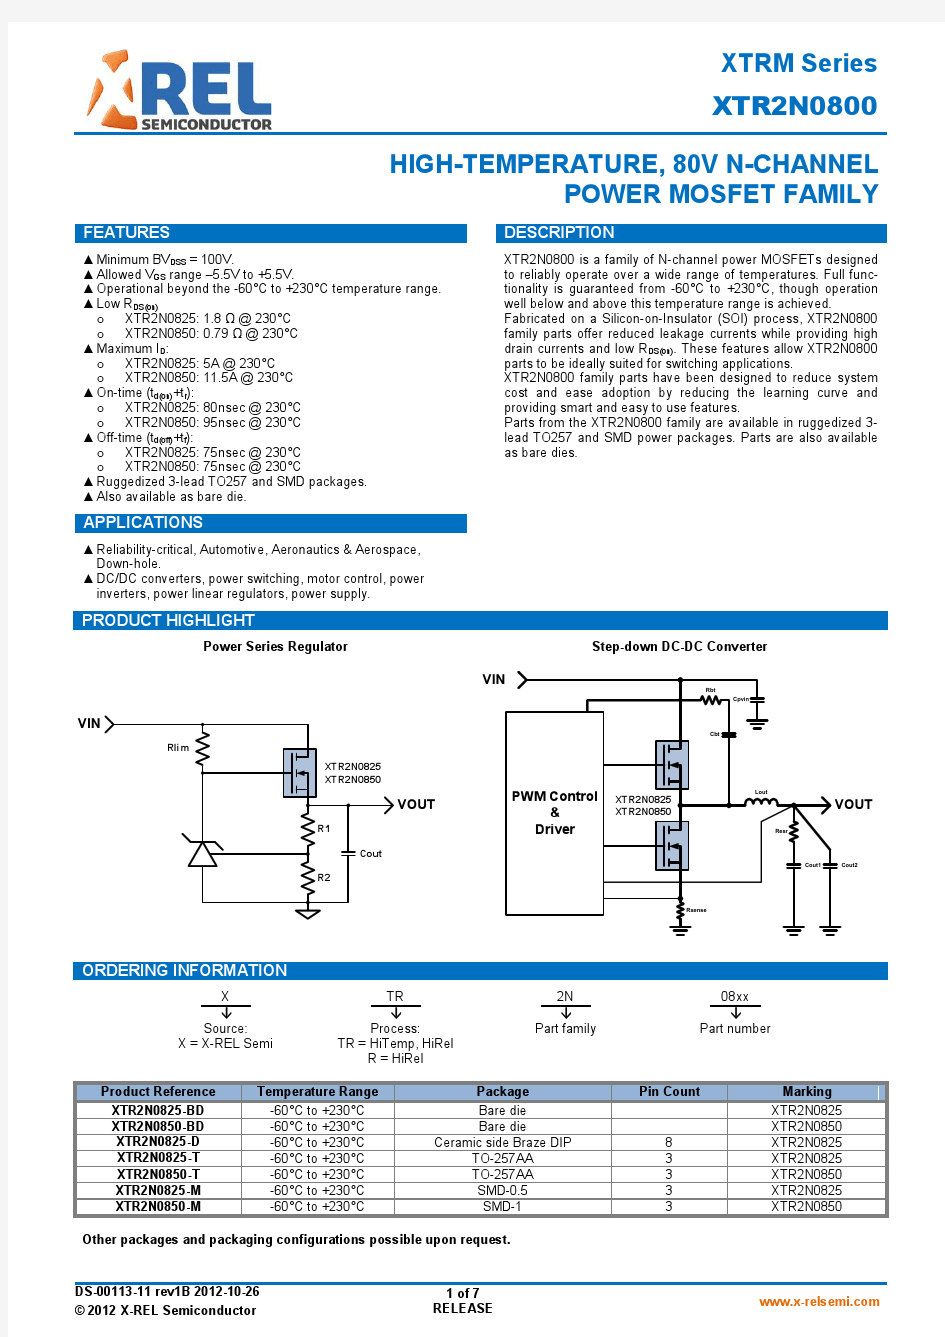 DS-00113-11-XTR2N0800-High-Temperature, 80V N-Channel Power MOSFET Family,230℃